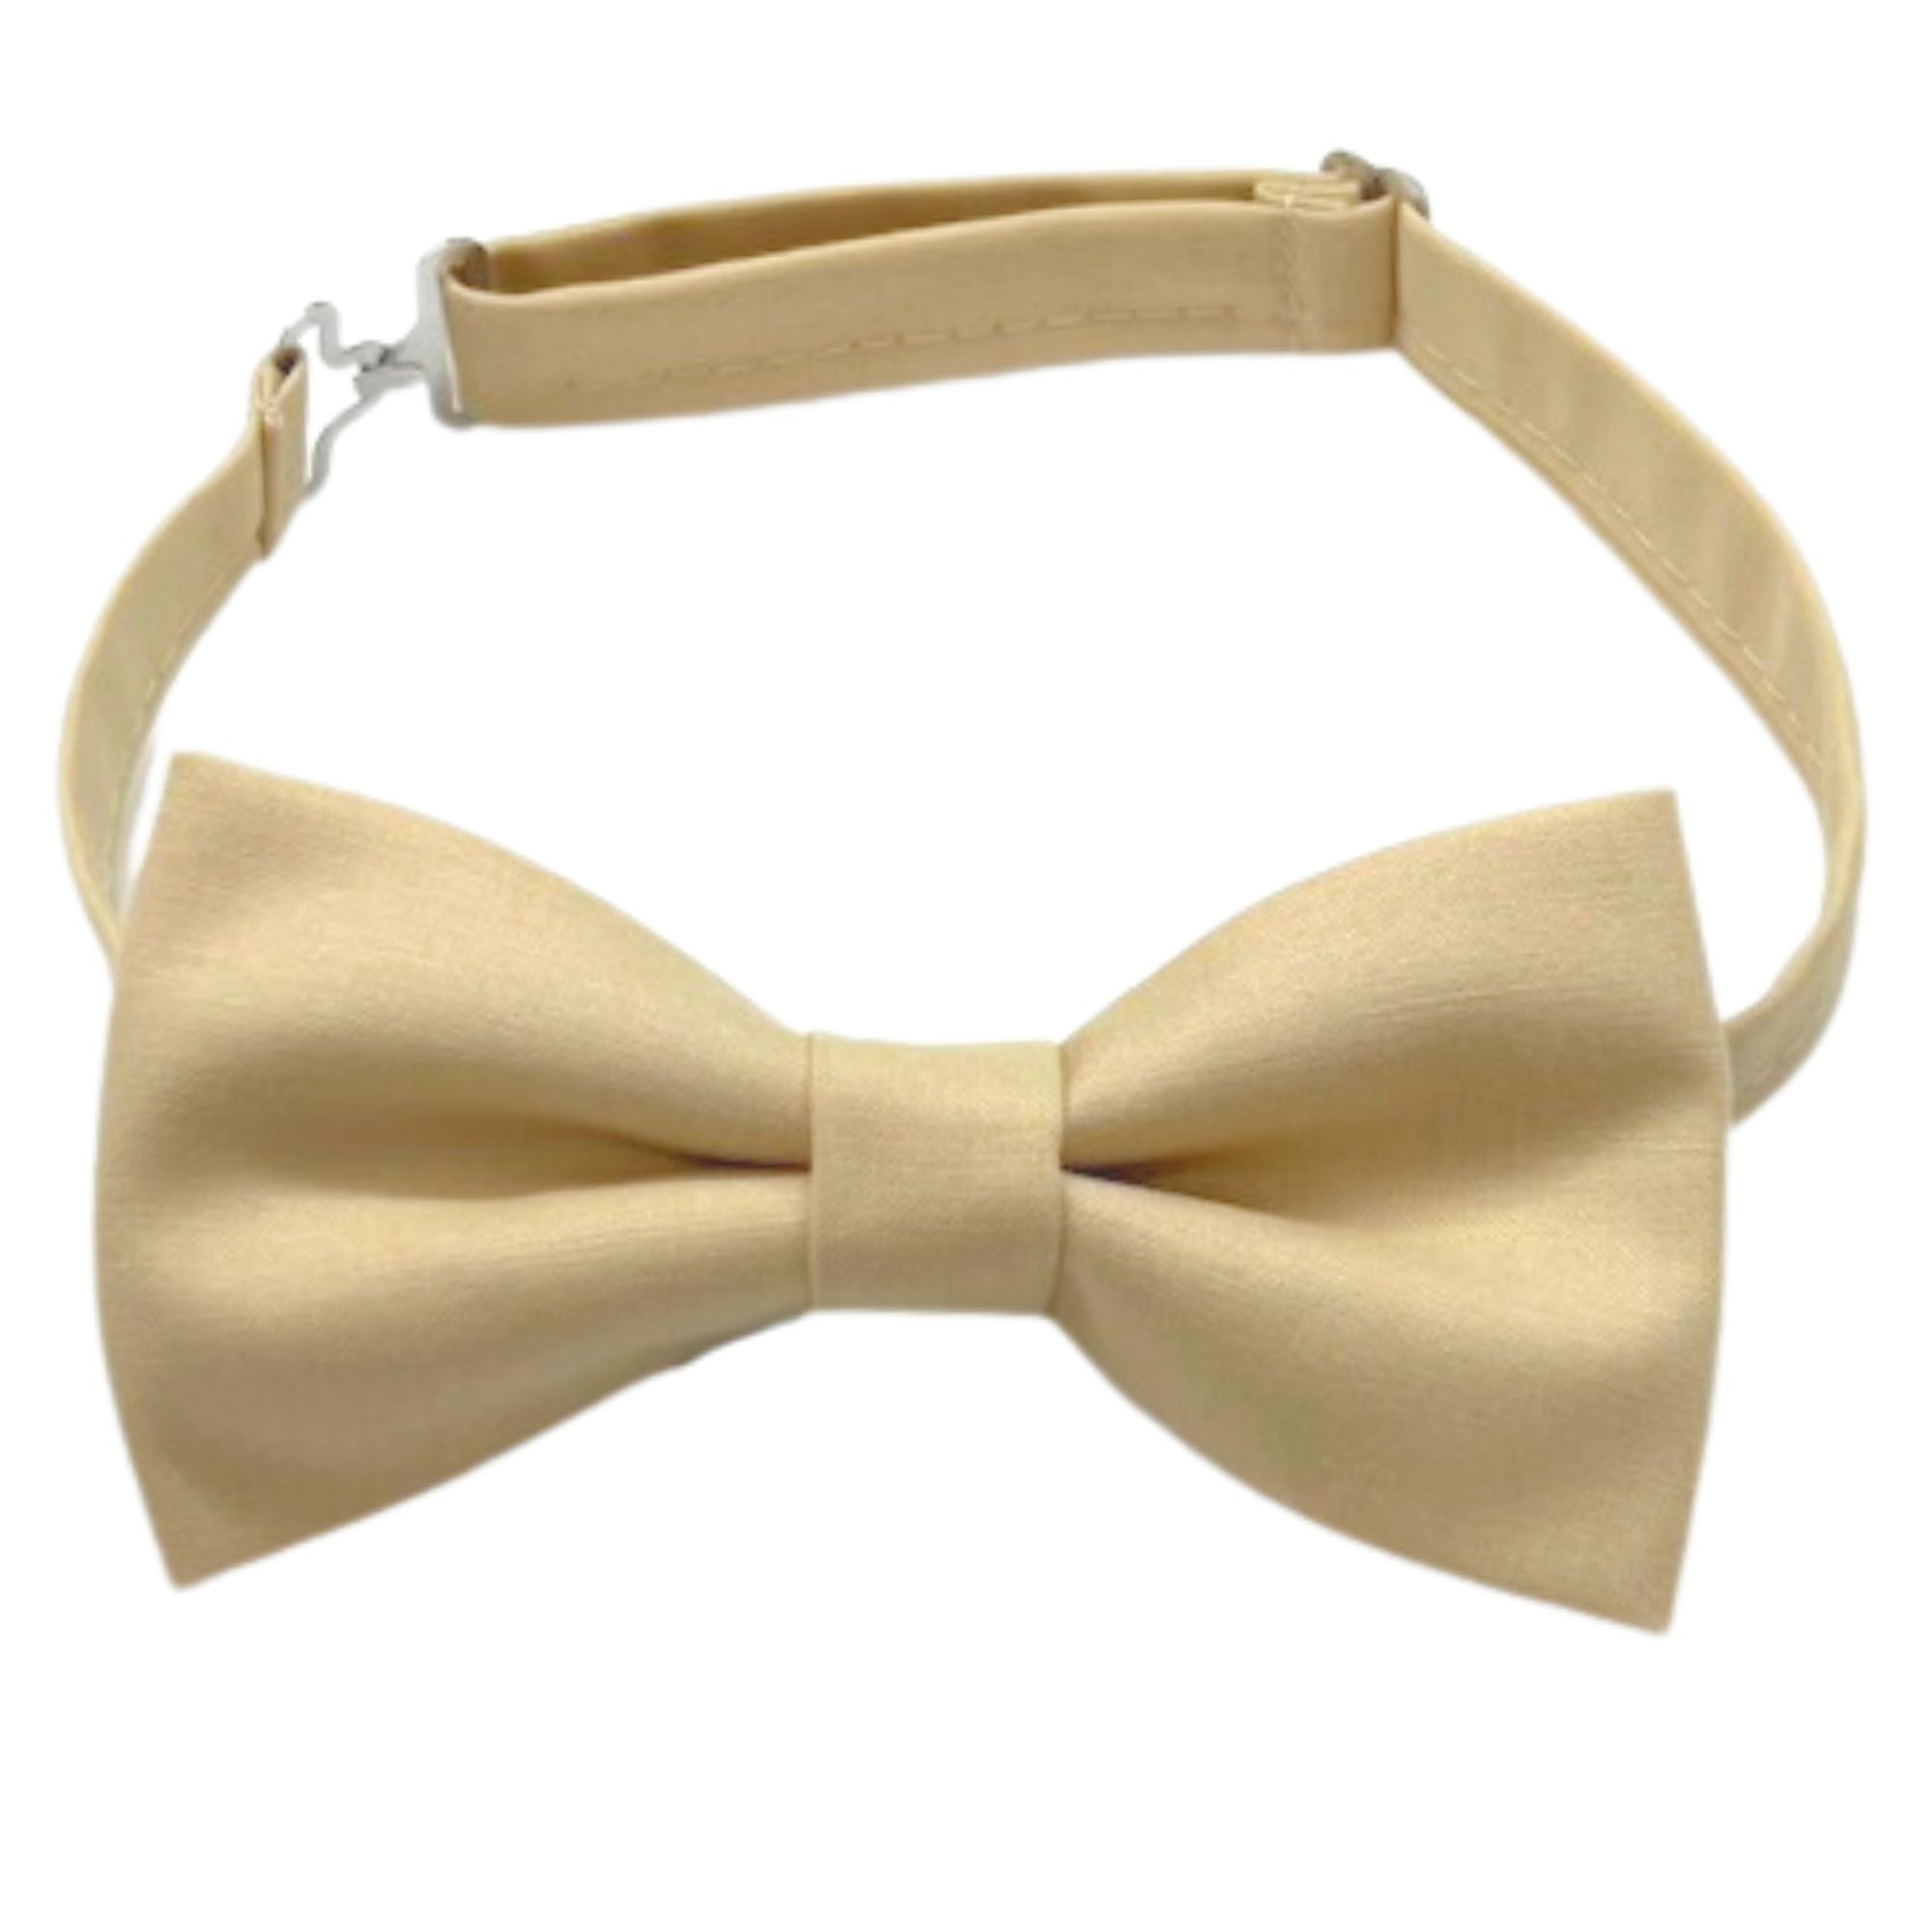 Champagne Bowties